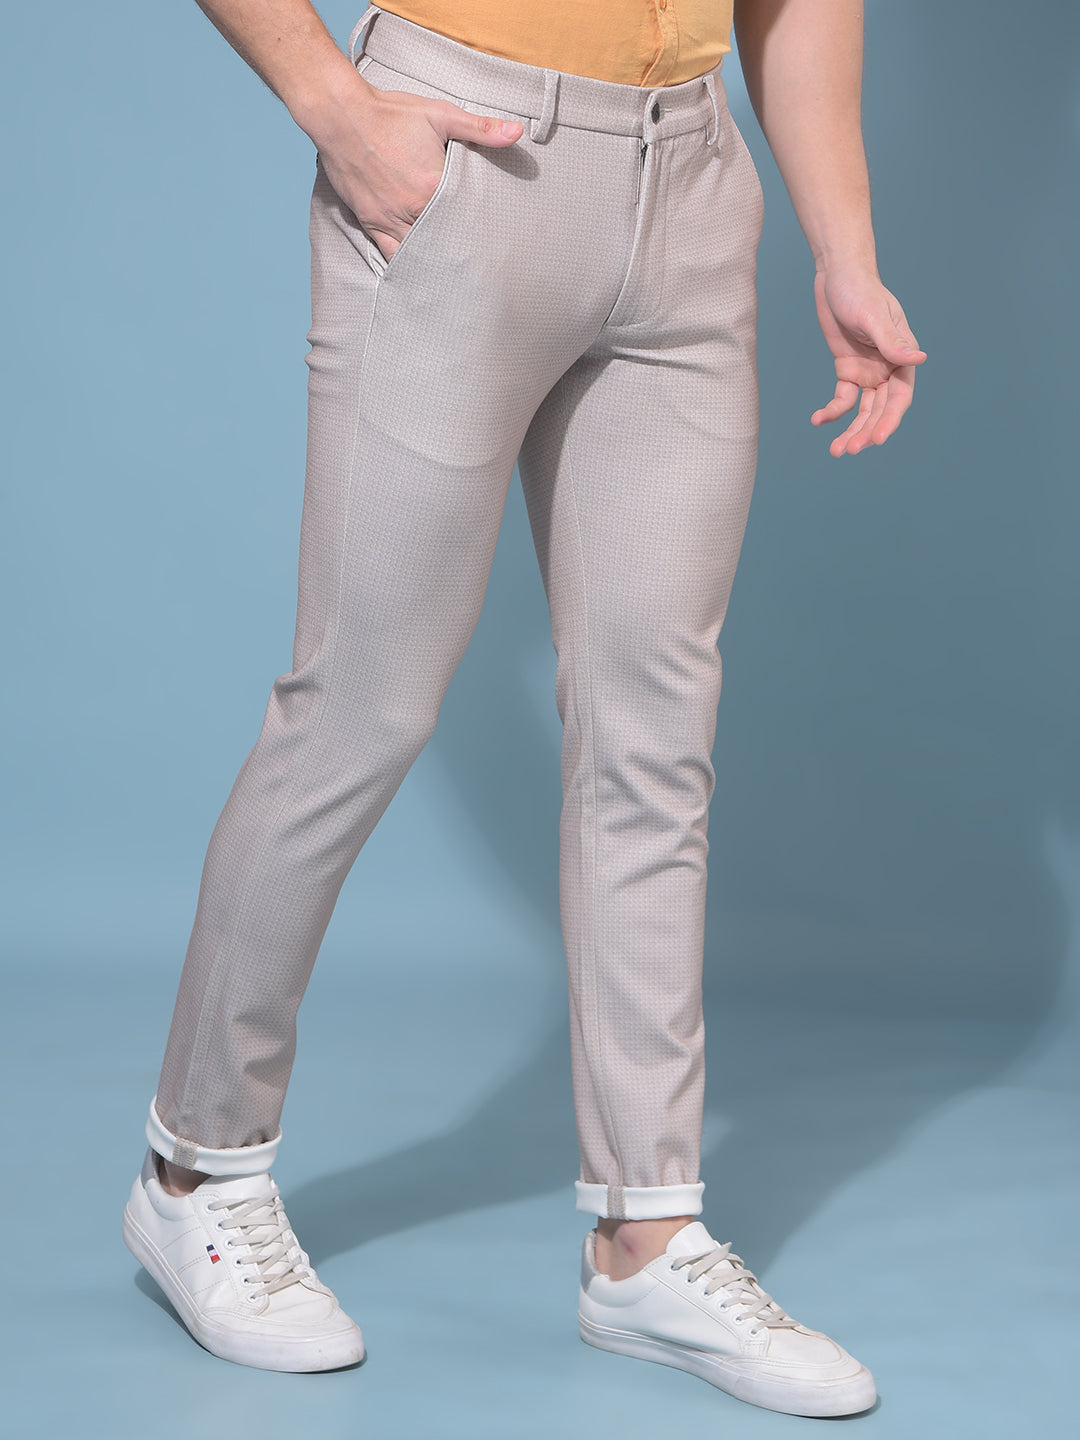 Beige Stretchable Printed Trousers-Men Trousers-Crimsoune Club